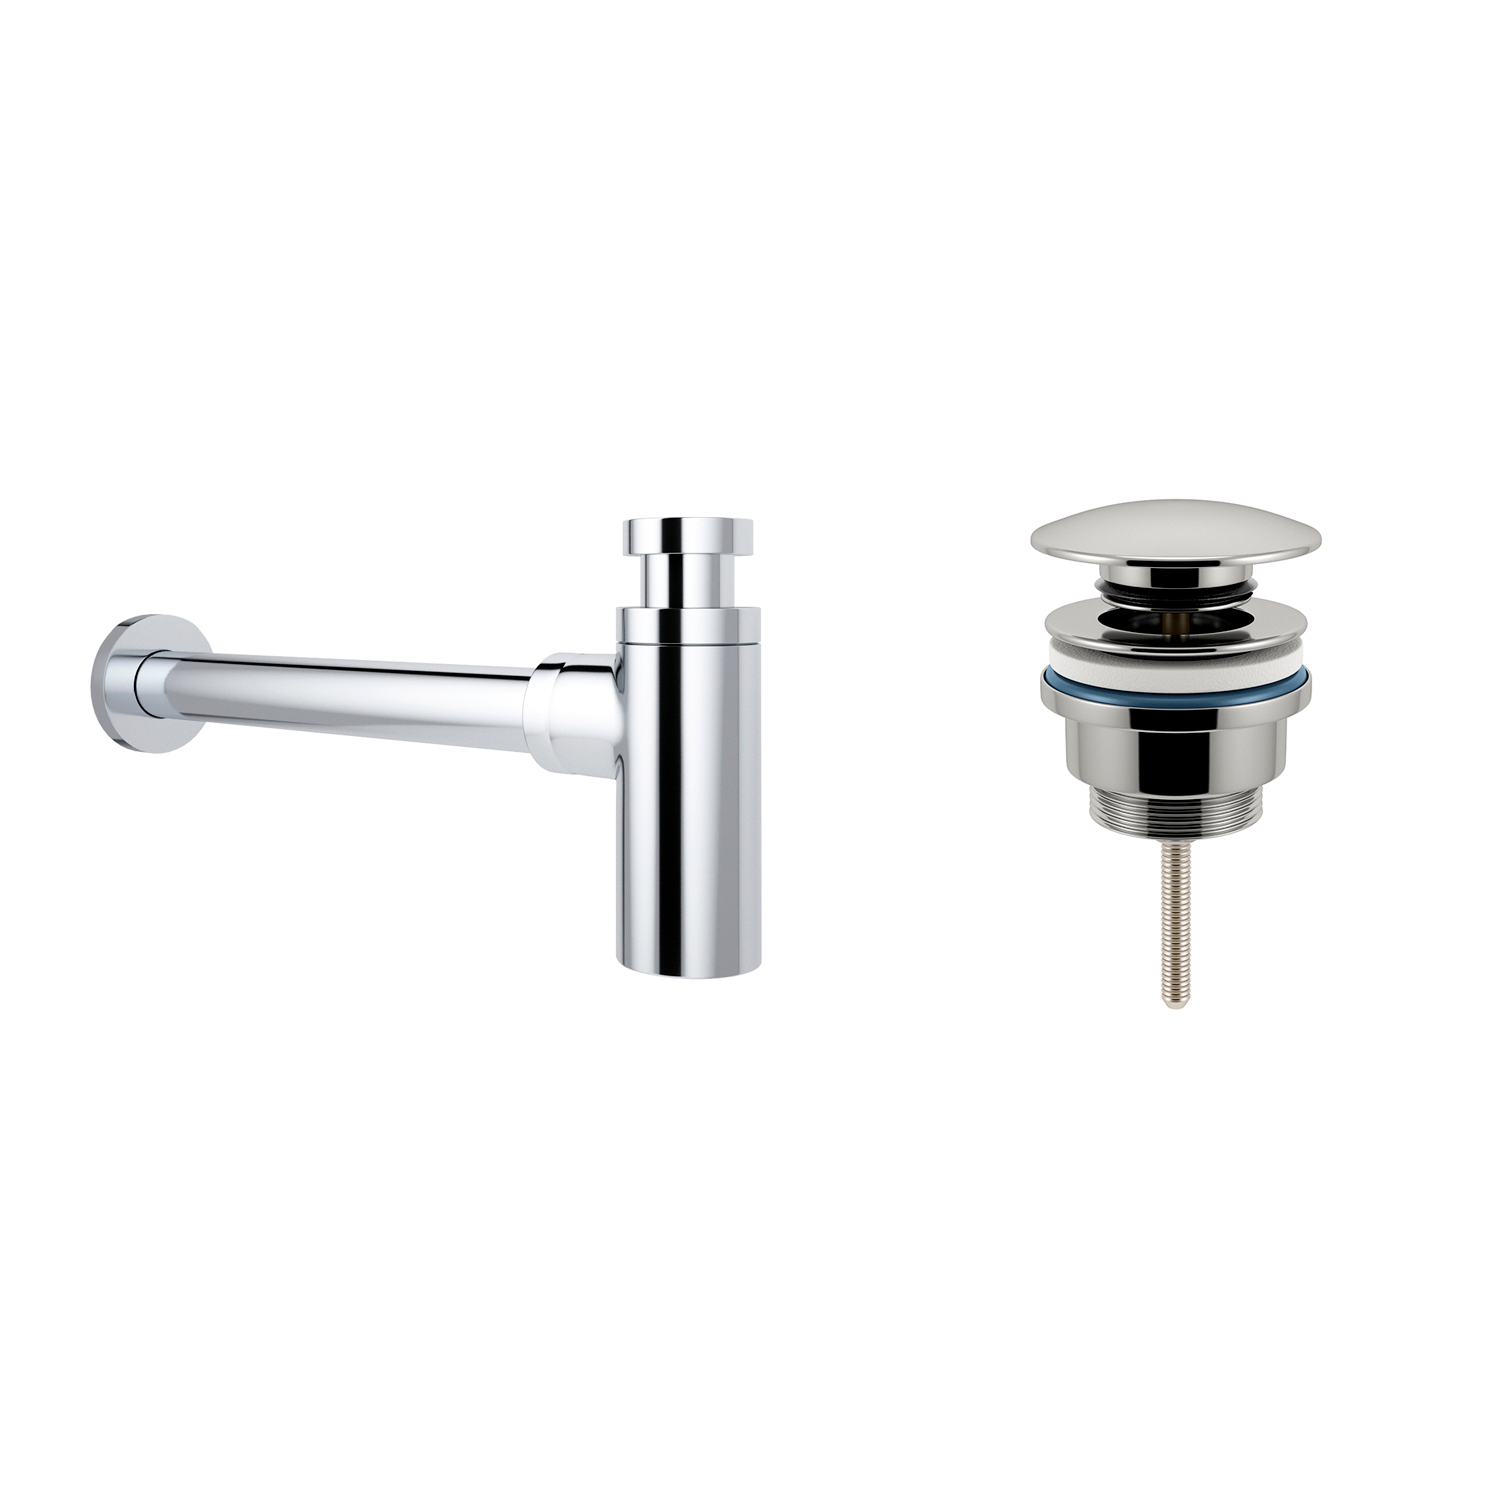 Opblazen Diversiteit Archaïsch Promotional set 2 in 1: sink siphon, drain valve Drainage System  182104003Drainage SystemPromotional set 2 in 1: sink siphon, waste  valve182104003 - WELLSEE | Basins, Furniture, Showers, Faucets, Toilets and  More for bathroom